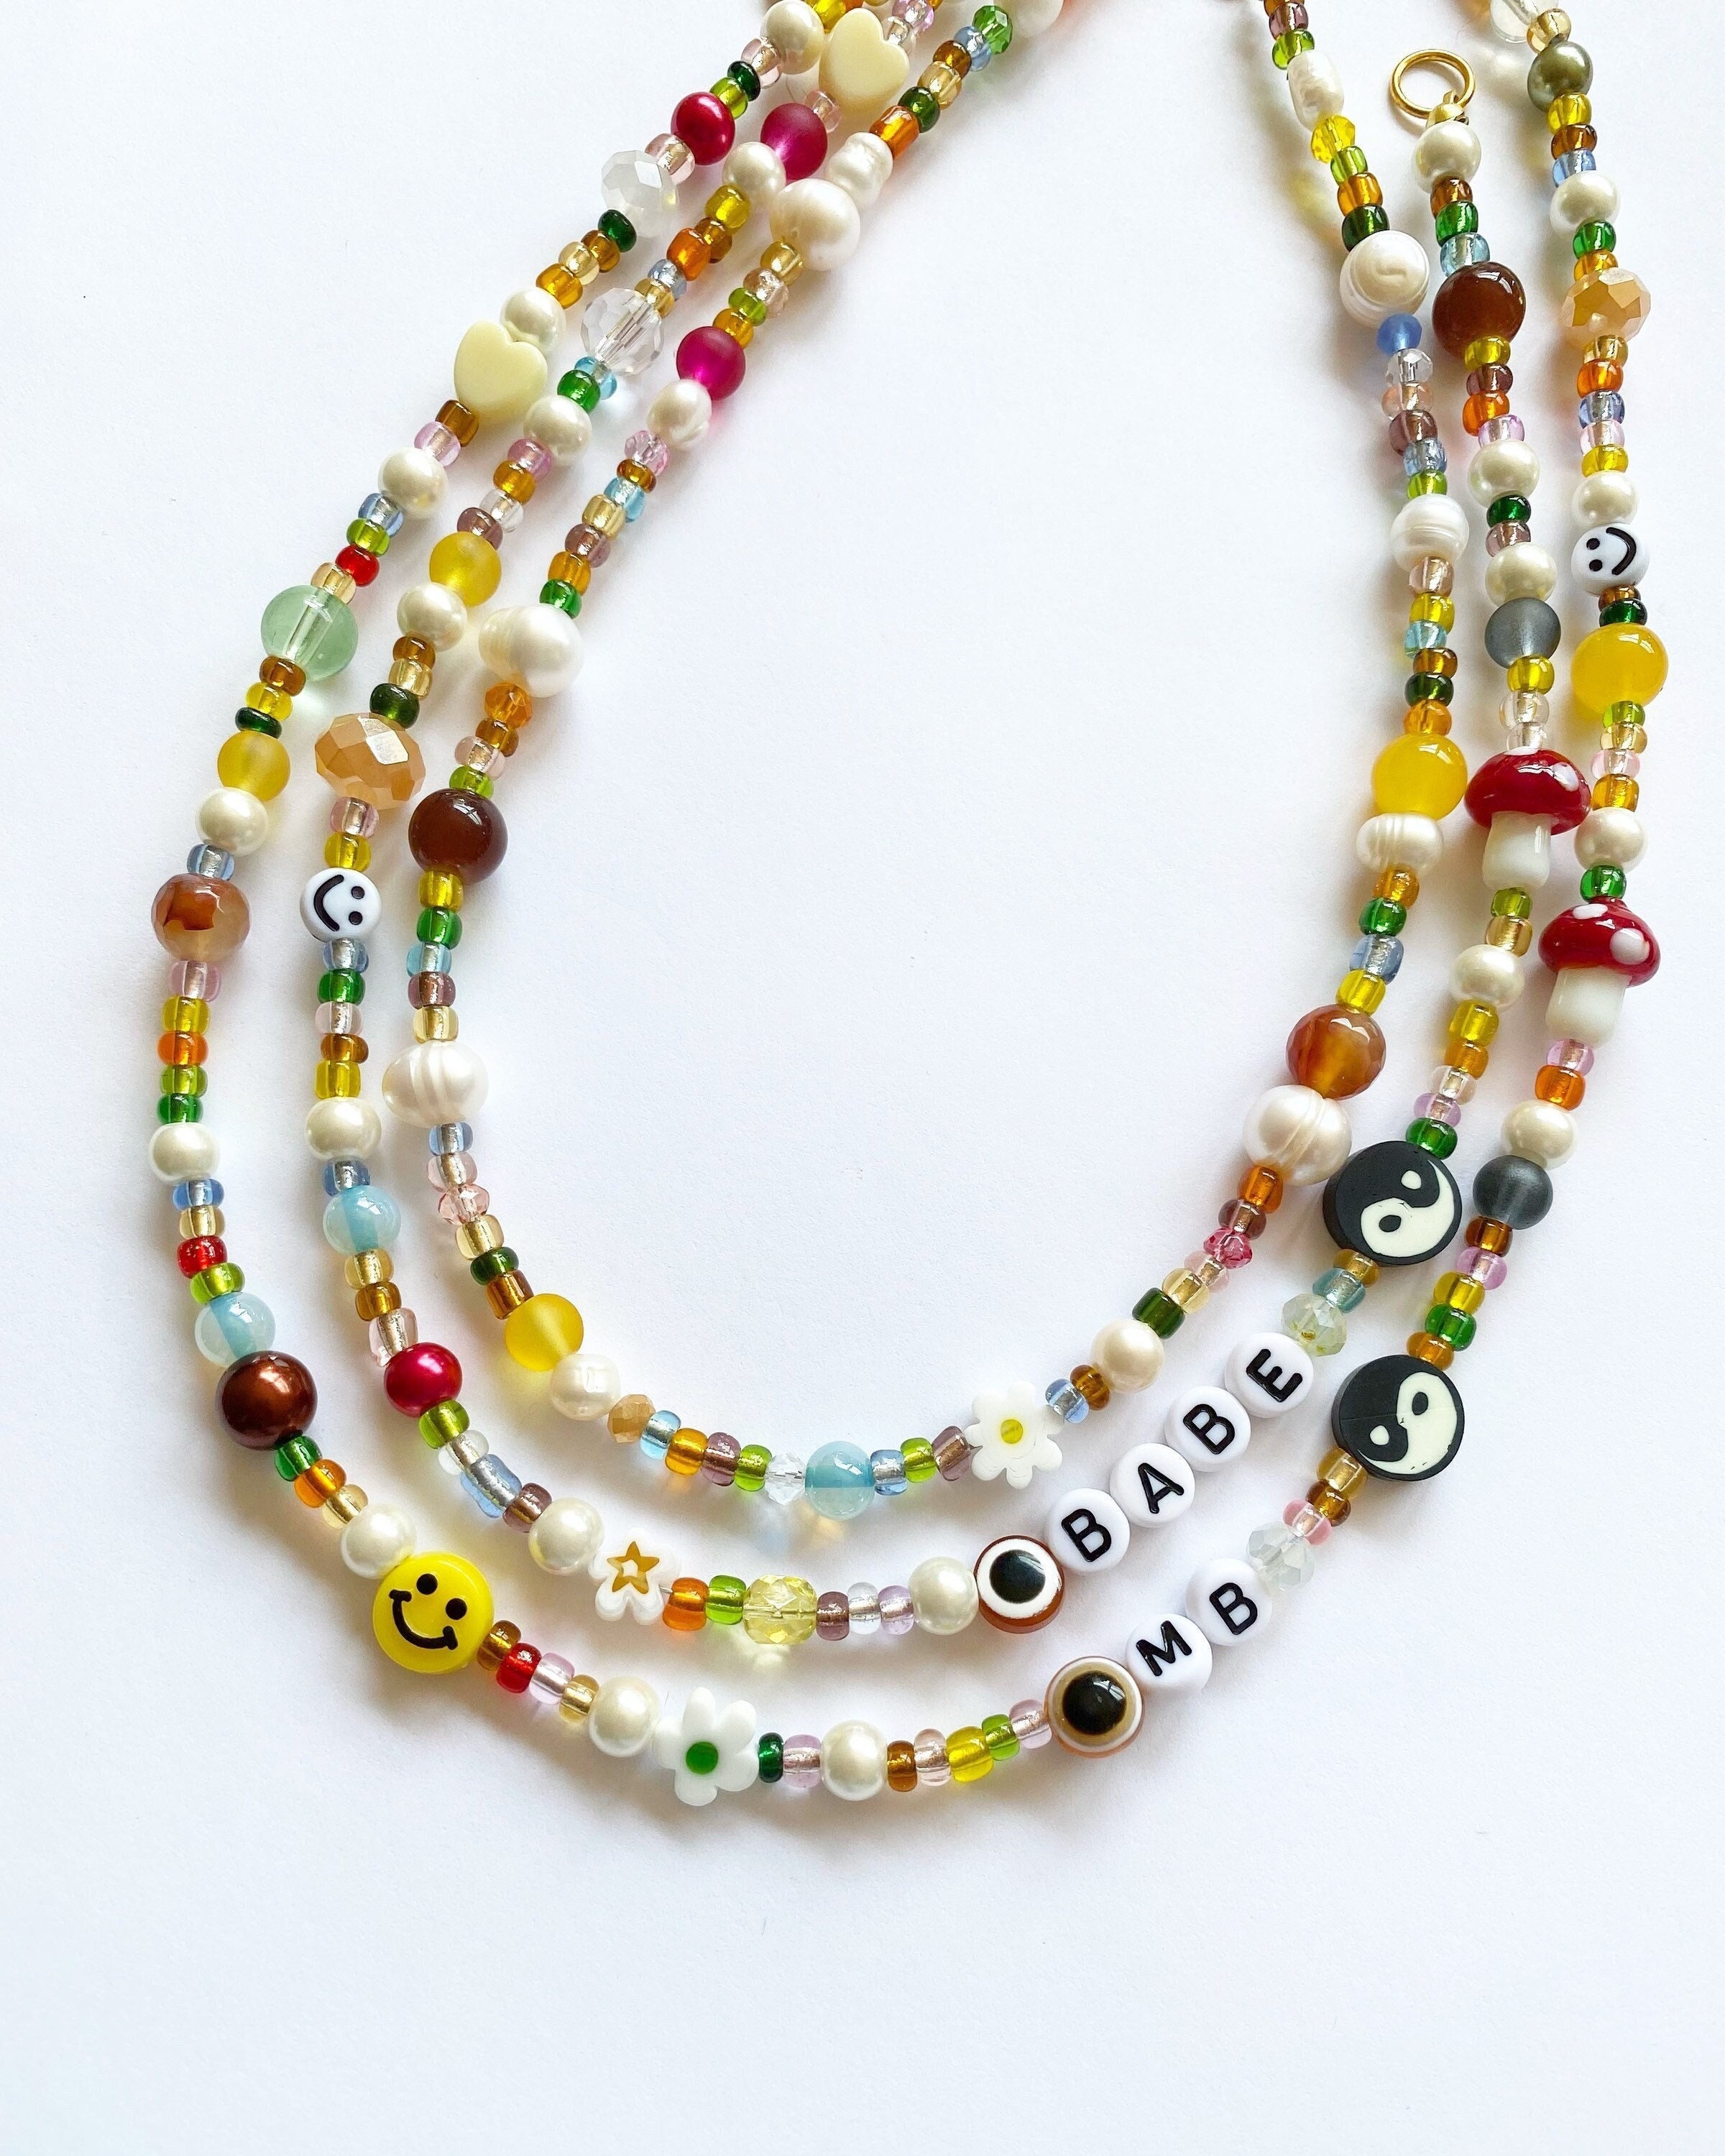 Handmade 90s Y2K Inspired Trendy Beaded Necklace Random Mismatched Fun Beads Smiley Face Fruit Dice Fun Rainbow Necklace Bright Unique